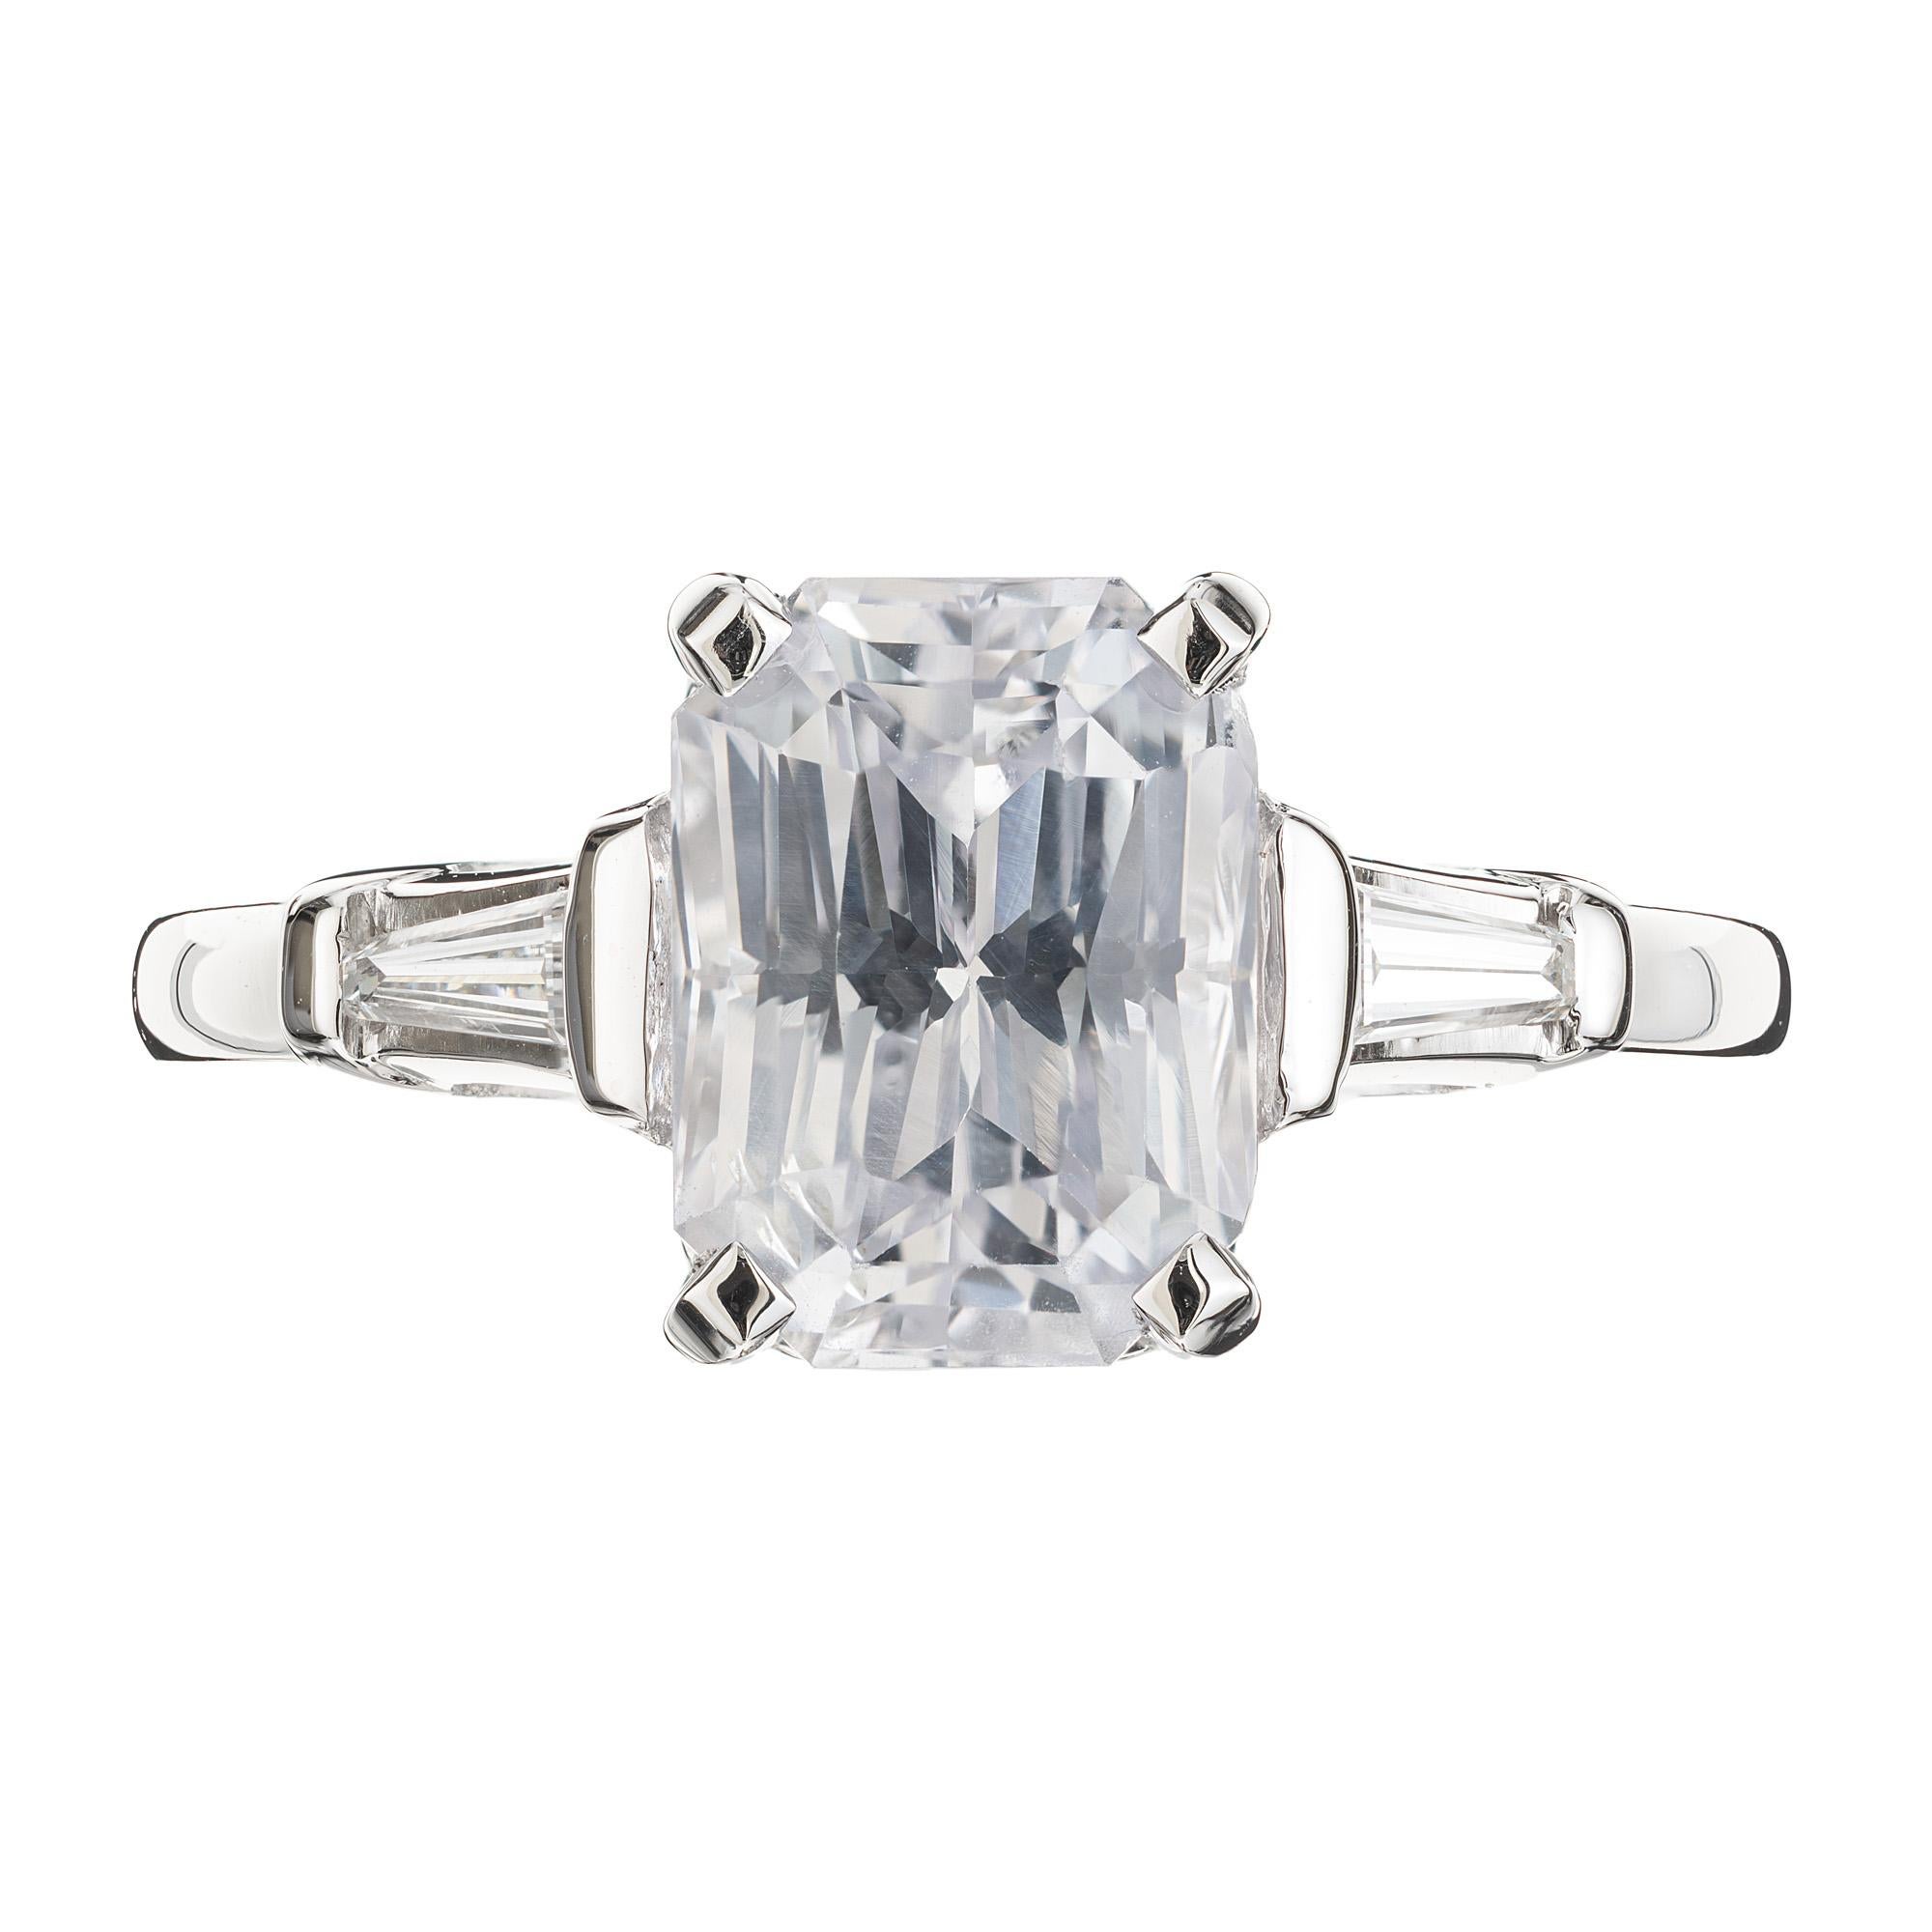 1940's Colorless sapphire and diamond three-stone engagement ring. GIA certified octagonal corner cut 3.18ct cut. sapphire mounted in a platinum setting with 2 tapered baguette diamonds. This color sapphire and size makes this a rare and unique